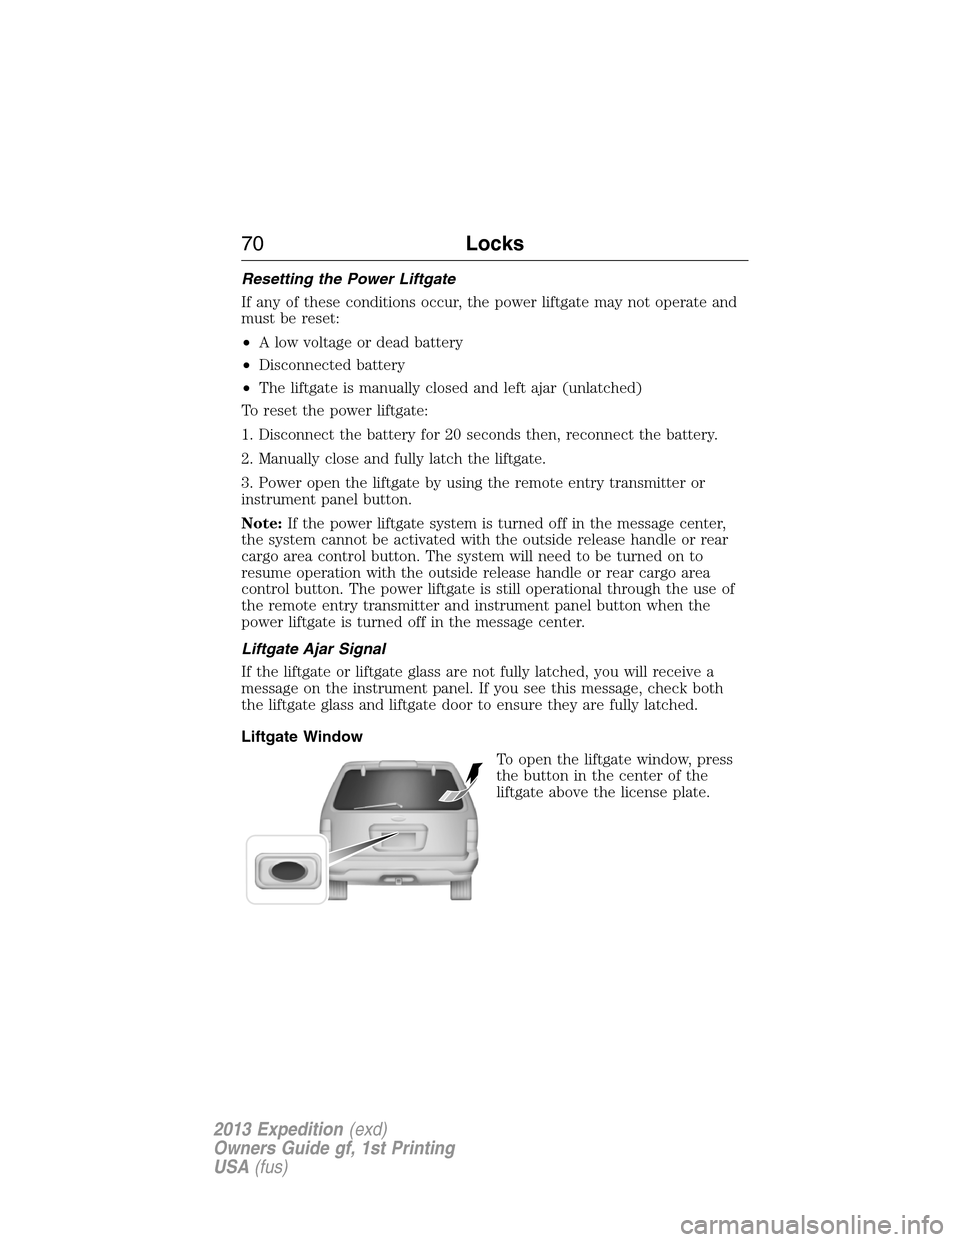 FORD EXPEDITION 2013 3.G Owners Manual Resetting the Power Liftgate
If any of these conditions occur, the power liftgate may not operate and
must be reset:
•A low voltage or dead battery
•Disconnected battery
•The liftgate is manuall